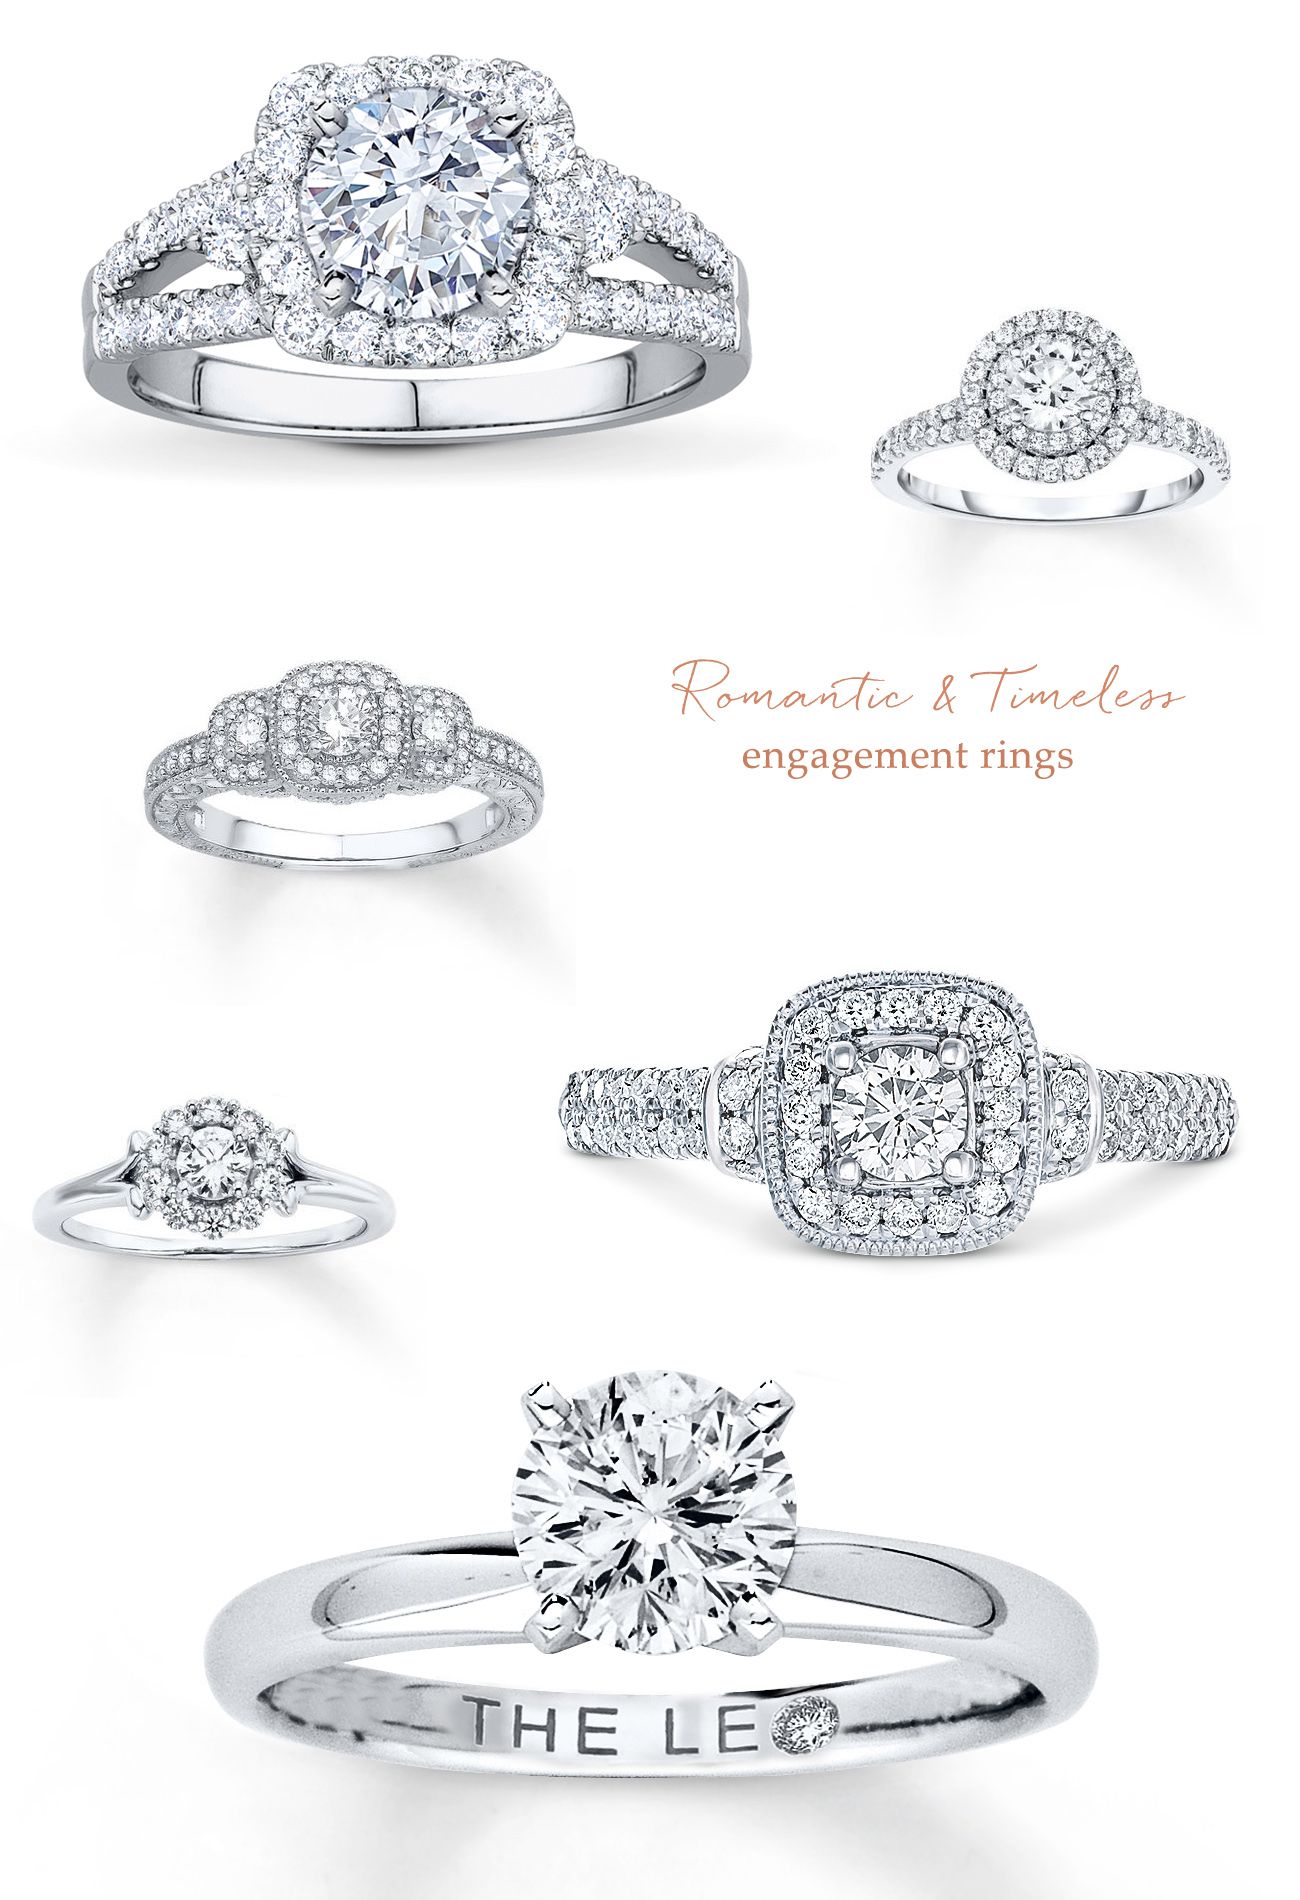 Find Your Engagement Ring Style With Jared Timeless Engagement Ring Engagement Rings Under 500 Engagement Rings